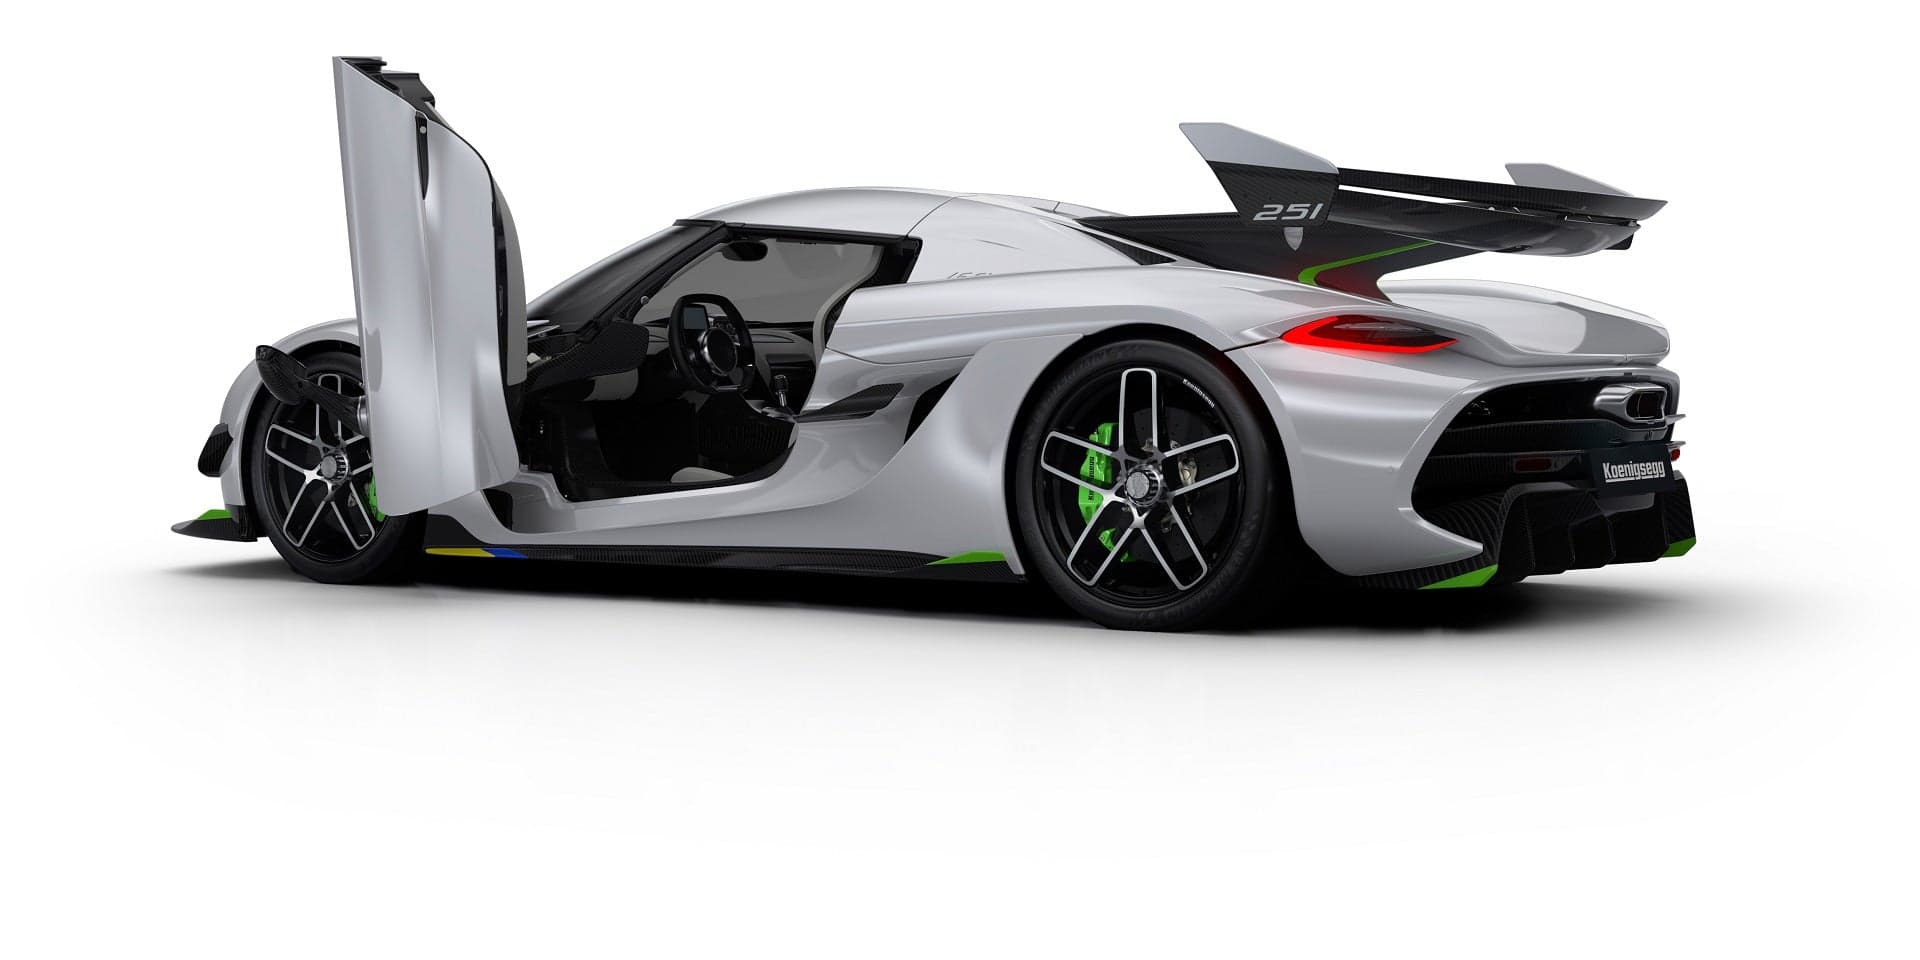 Koenigsegg Jesko: A Swedish ‘Megacar’ With 1,600 HP, 7 Clutches, and a 300-MPH Top Speed